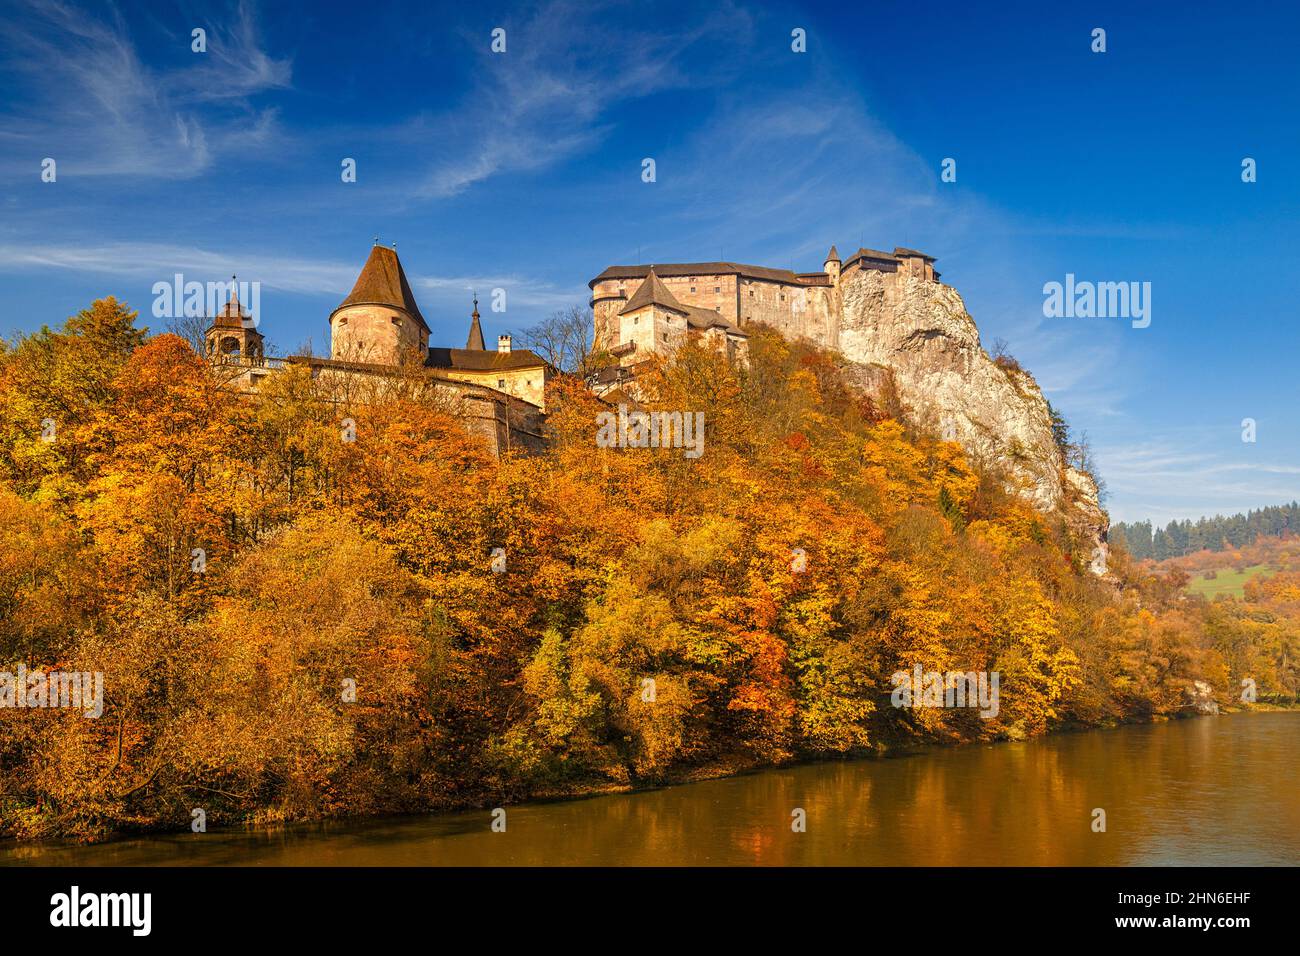 The medieval Orava Castle over a river at autumn, Slovakia, Europe. Stock Photo